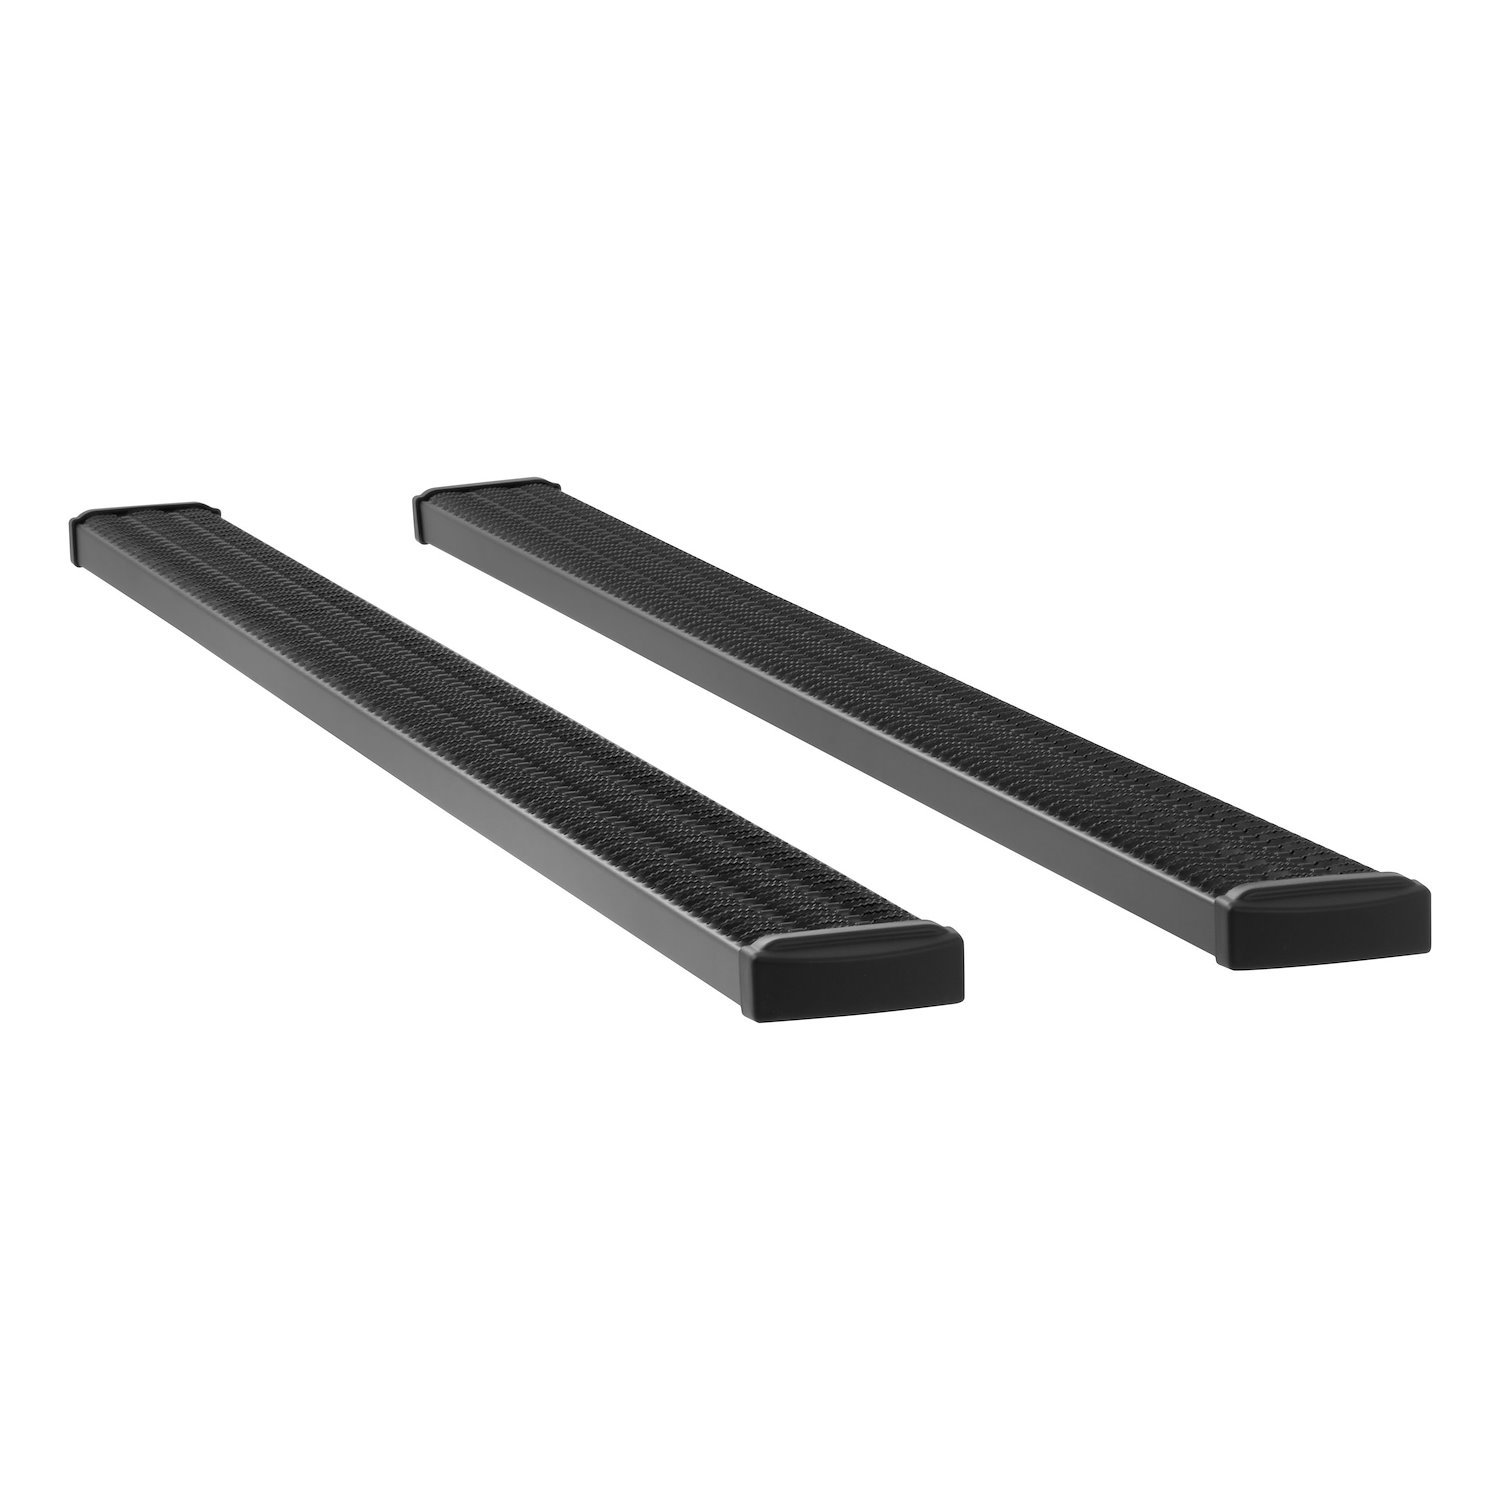 415114-401346 Grip Step 7 in. x 114 in. Black Aluminum Running Boards Fits Select Chevy Express, GMC Savana